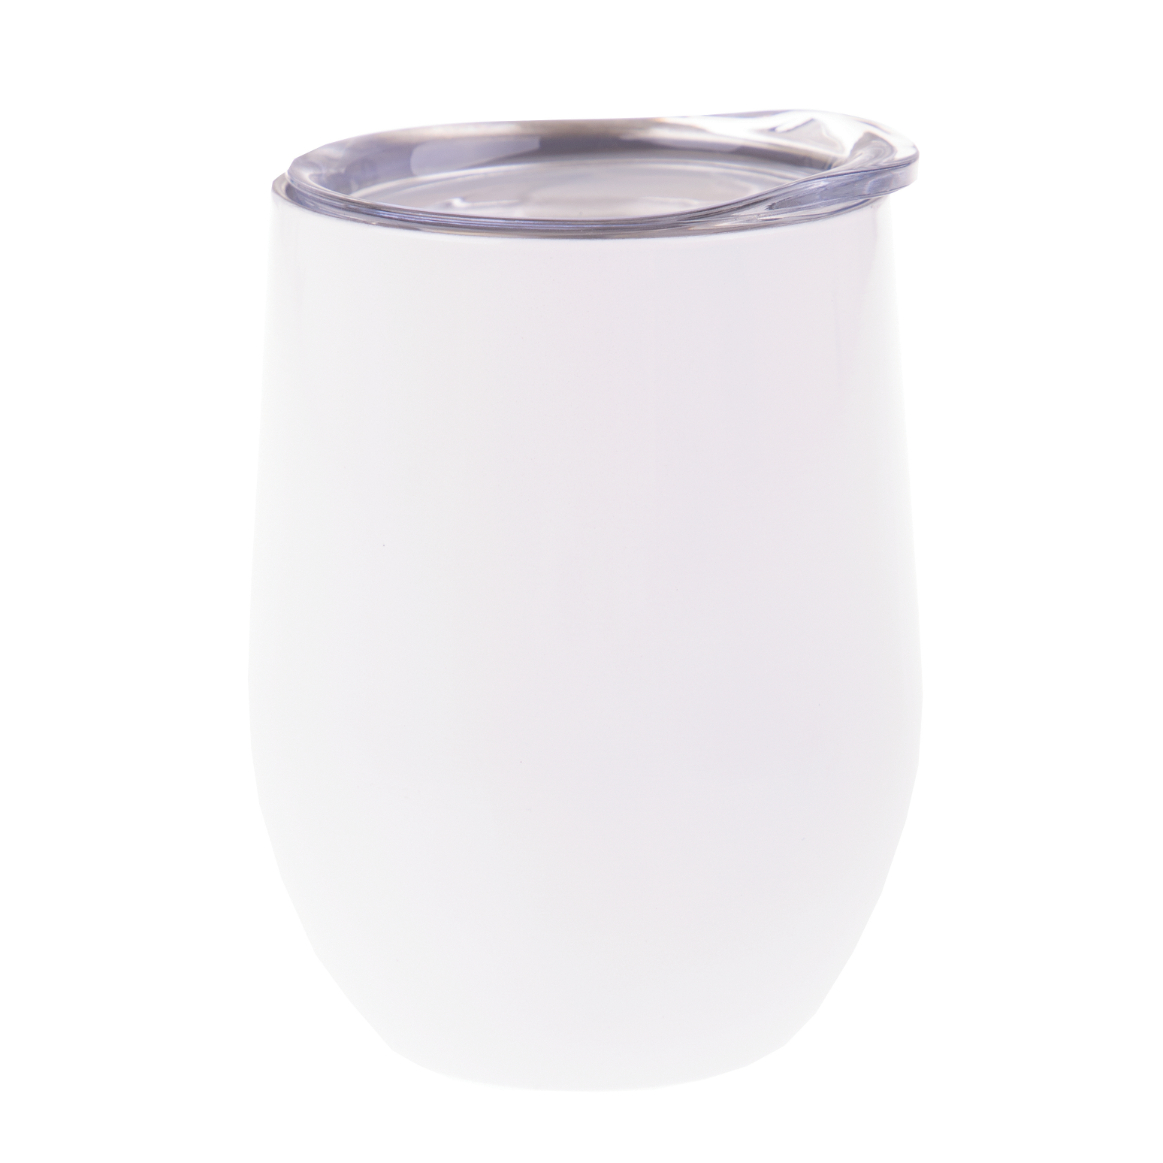 Oasis Stainless Steel Double Wall Insulated Wine Tumbler 330ml White